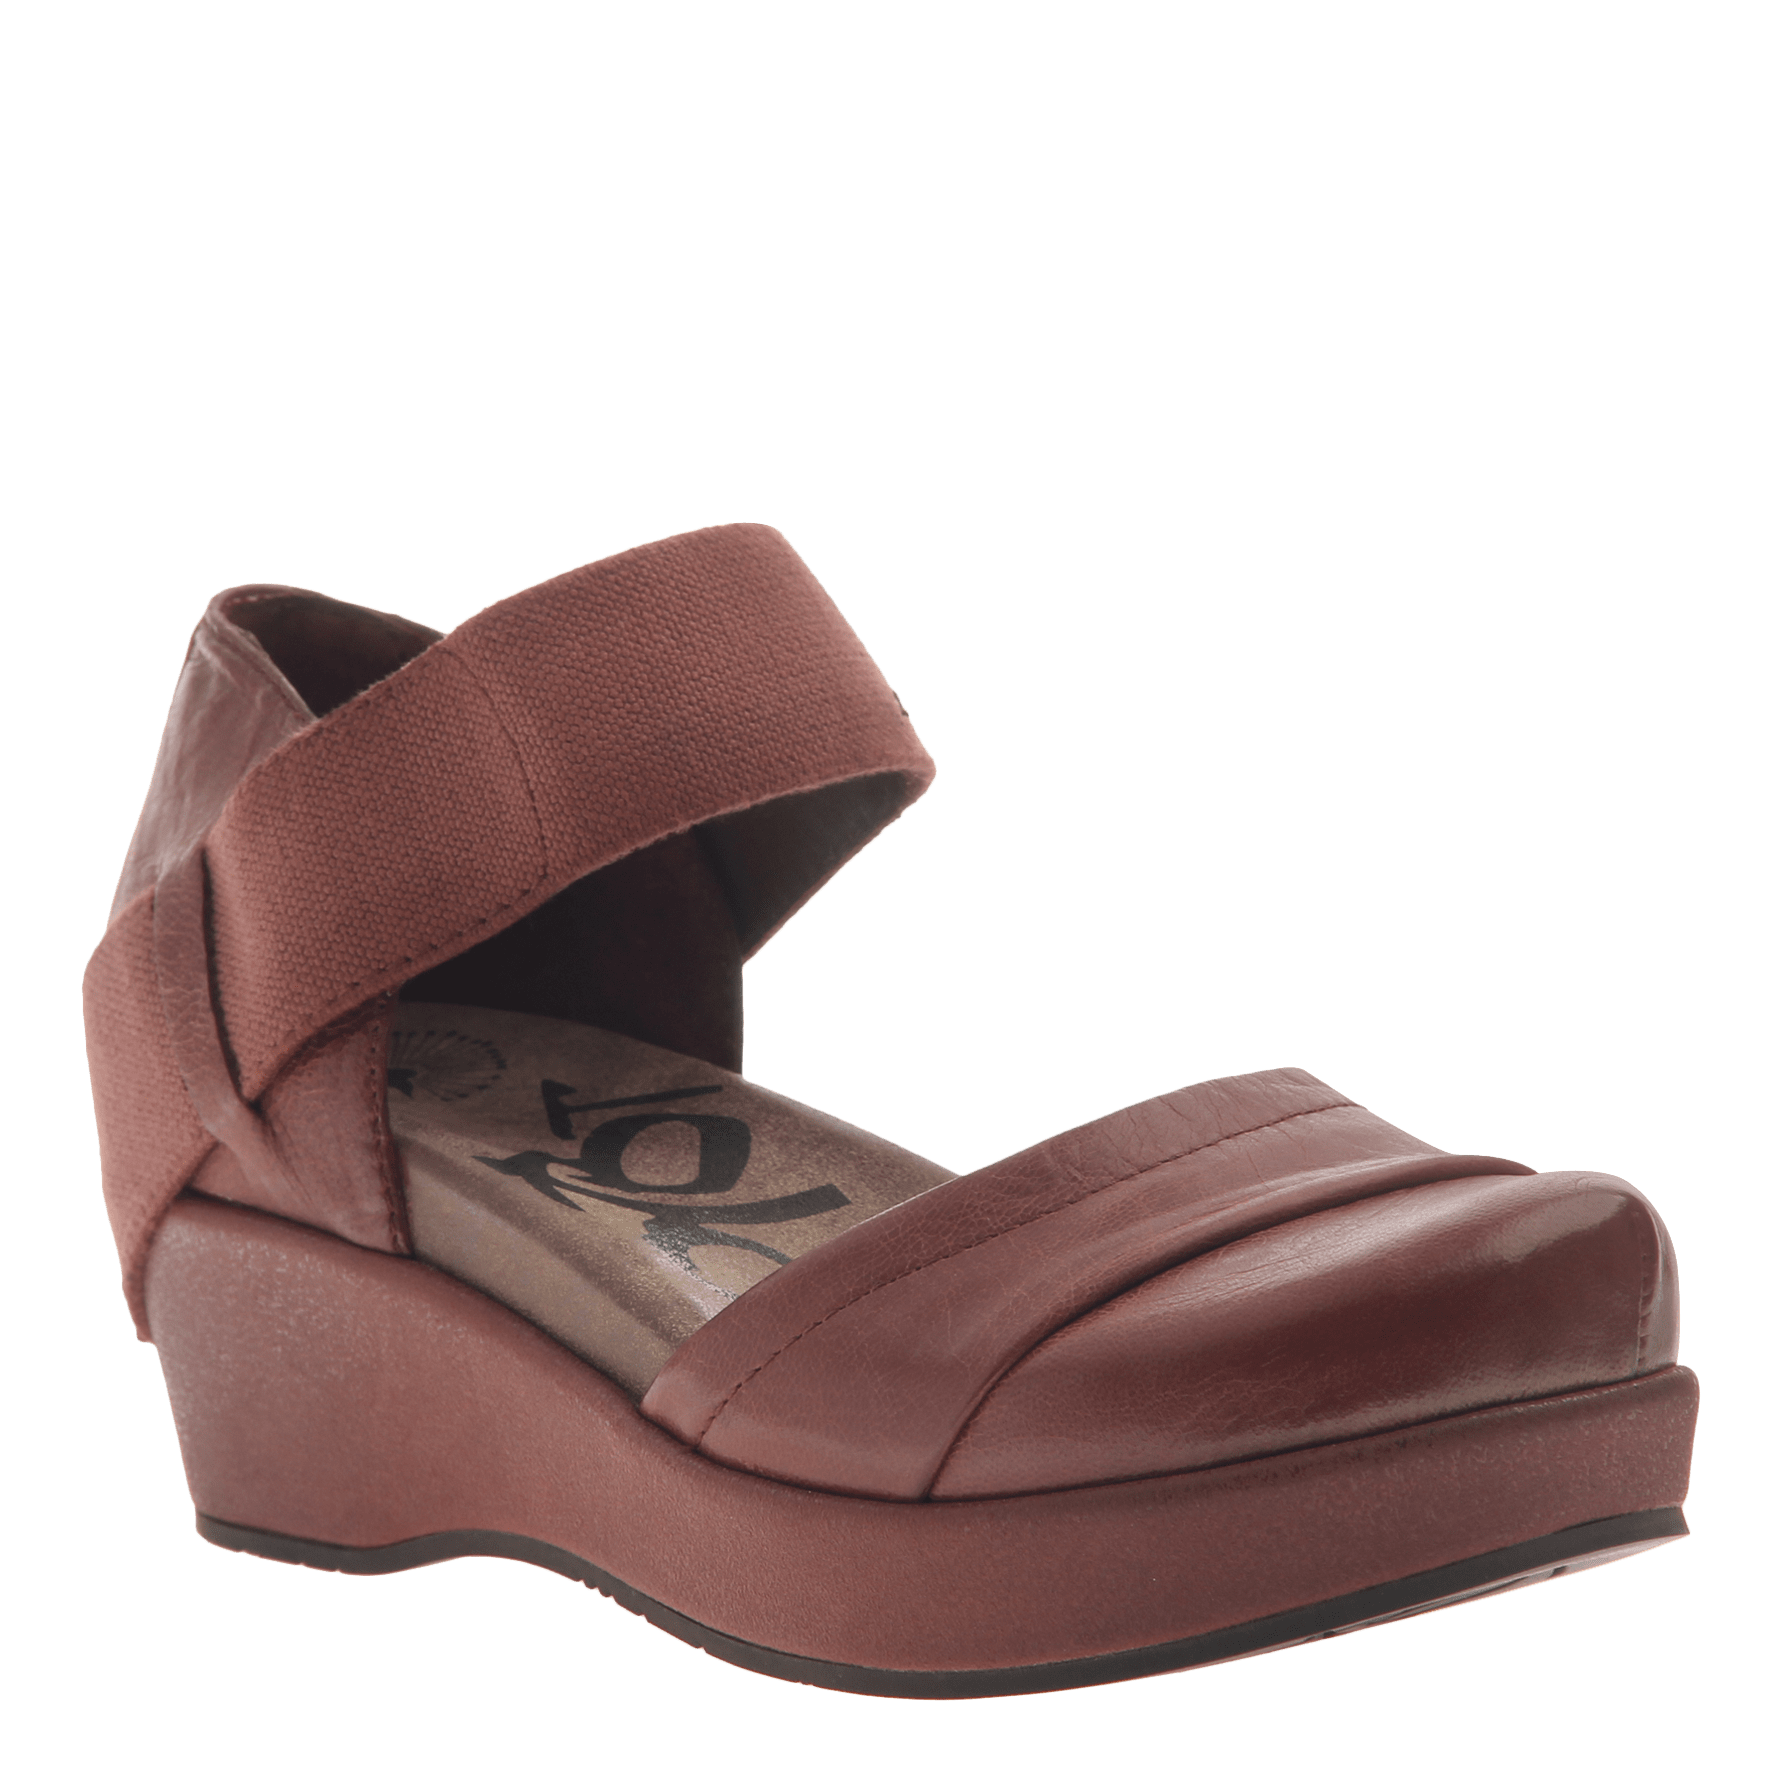 most comfortable closed toe wedges